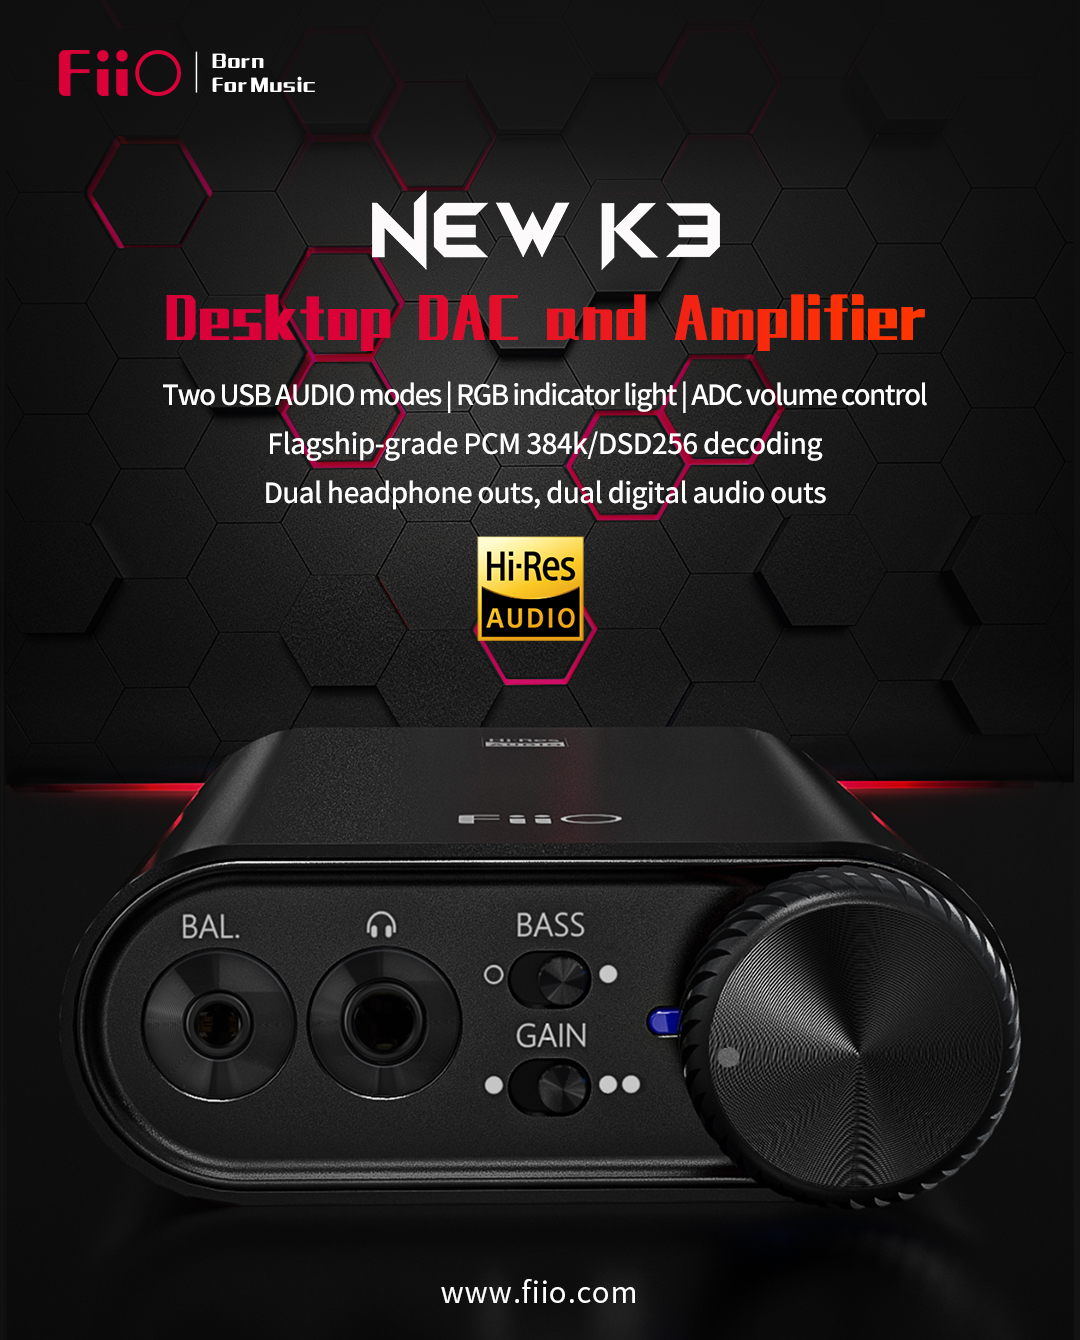 Getting Impressive first by the Core, FiiO Desktop DAC and Amplifier New  K3 Is Officially Released!-FIIO---BORN FOR MUSIC